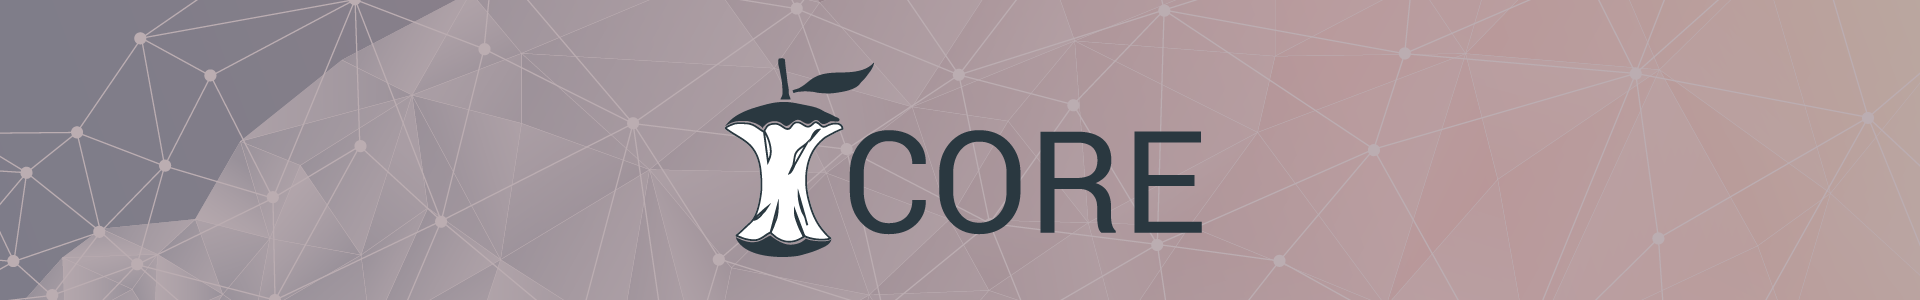 Making scientific knowledge more easily and freely discoverable through CORE.ac.uk - Banner